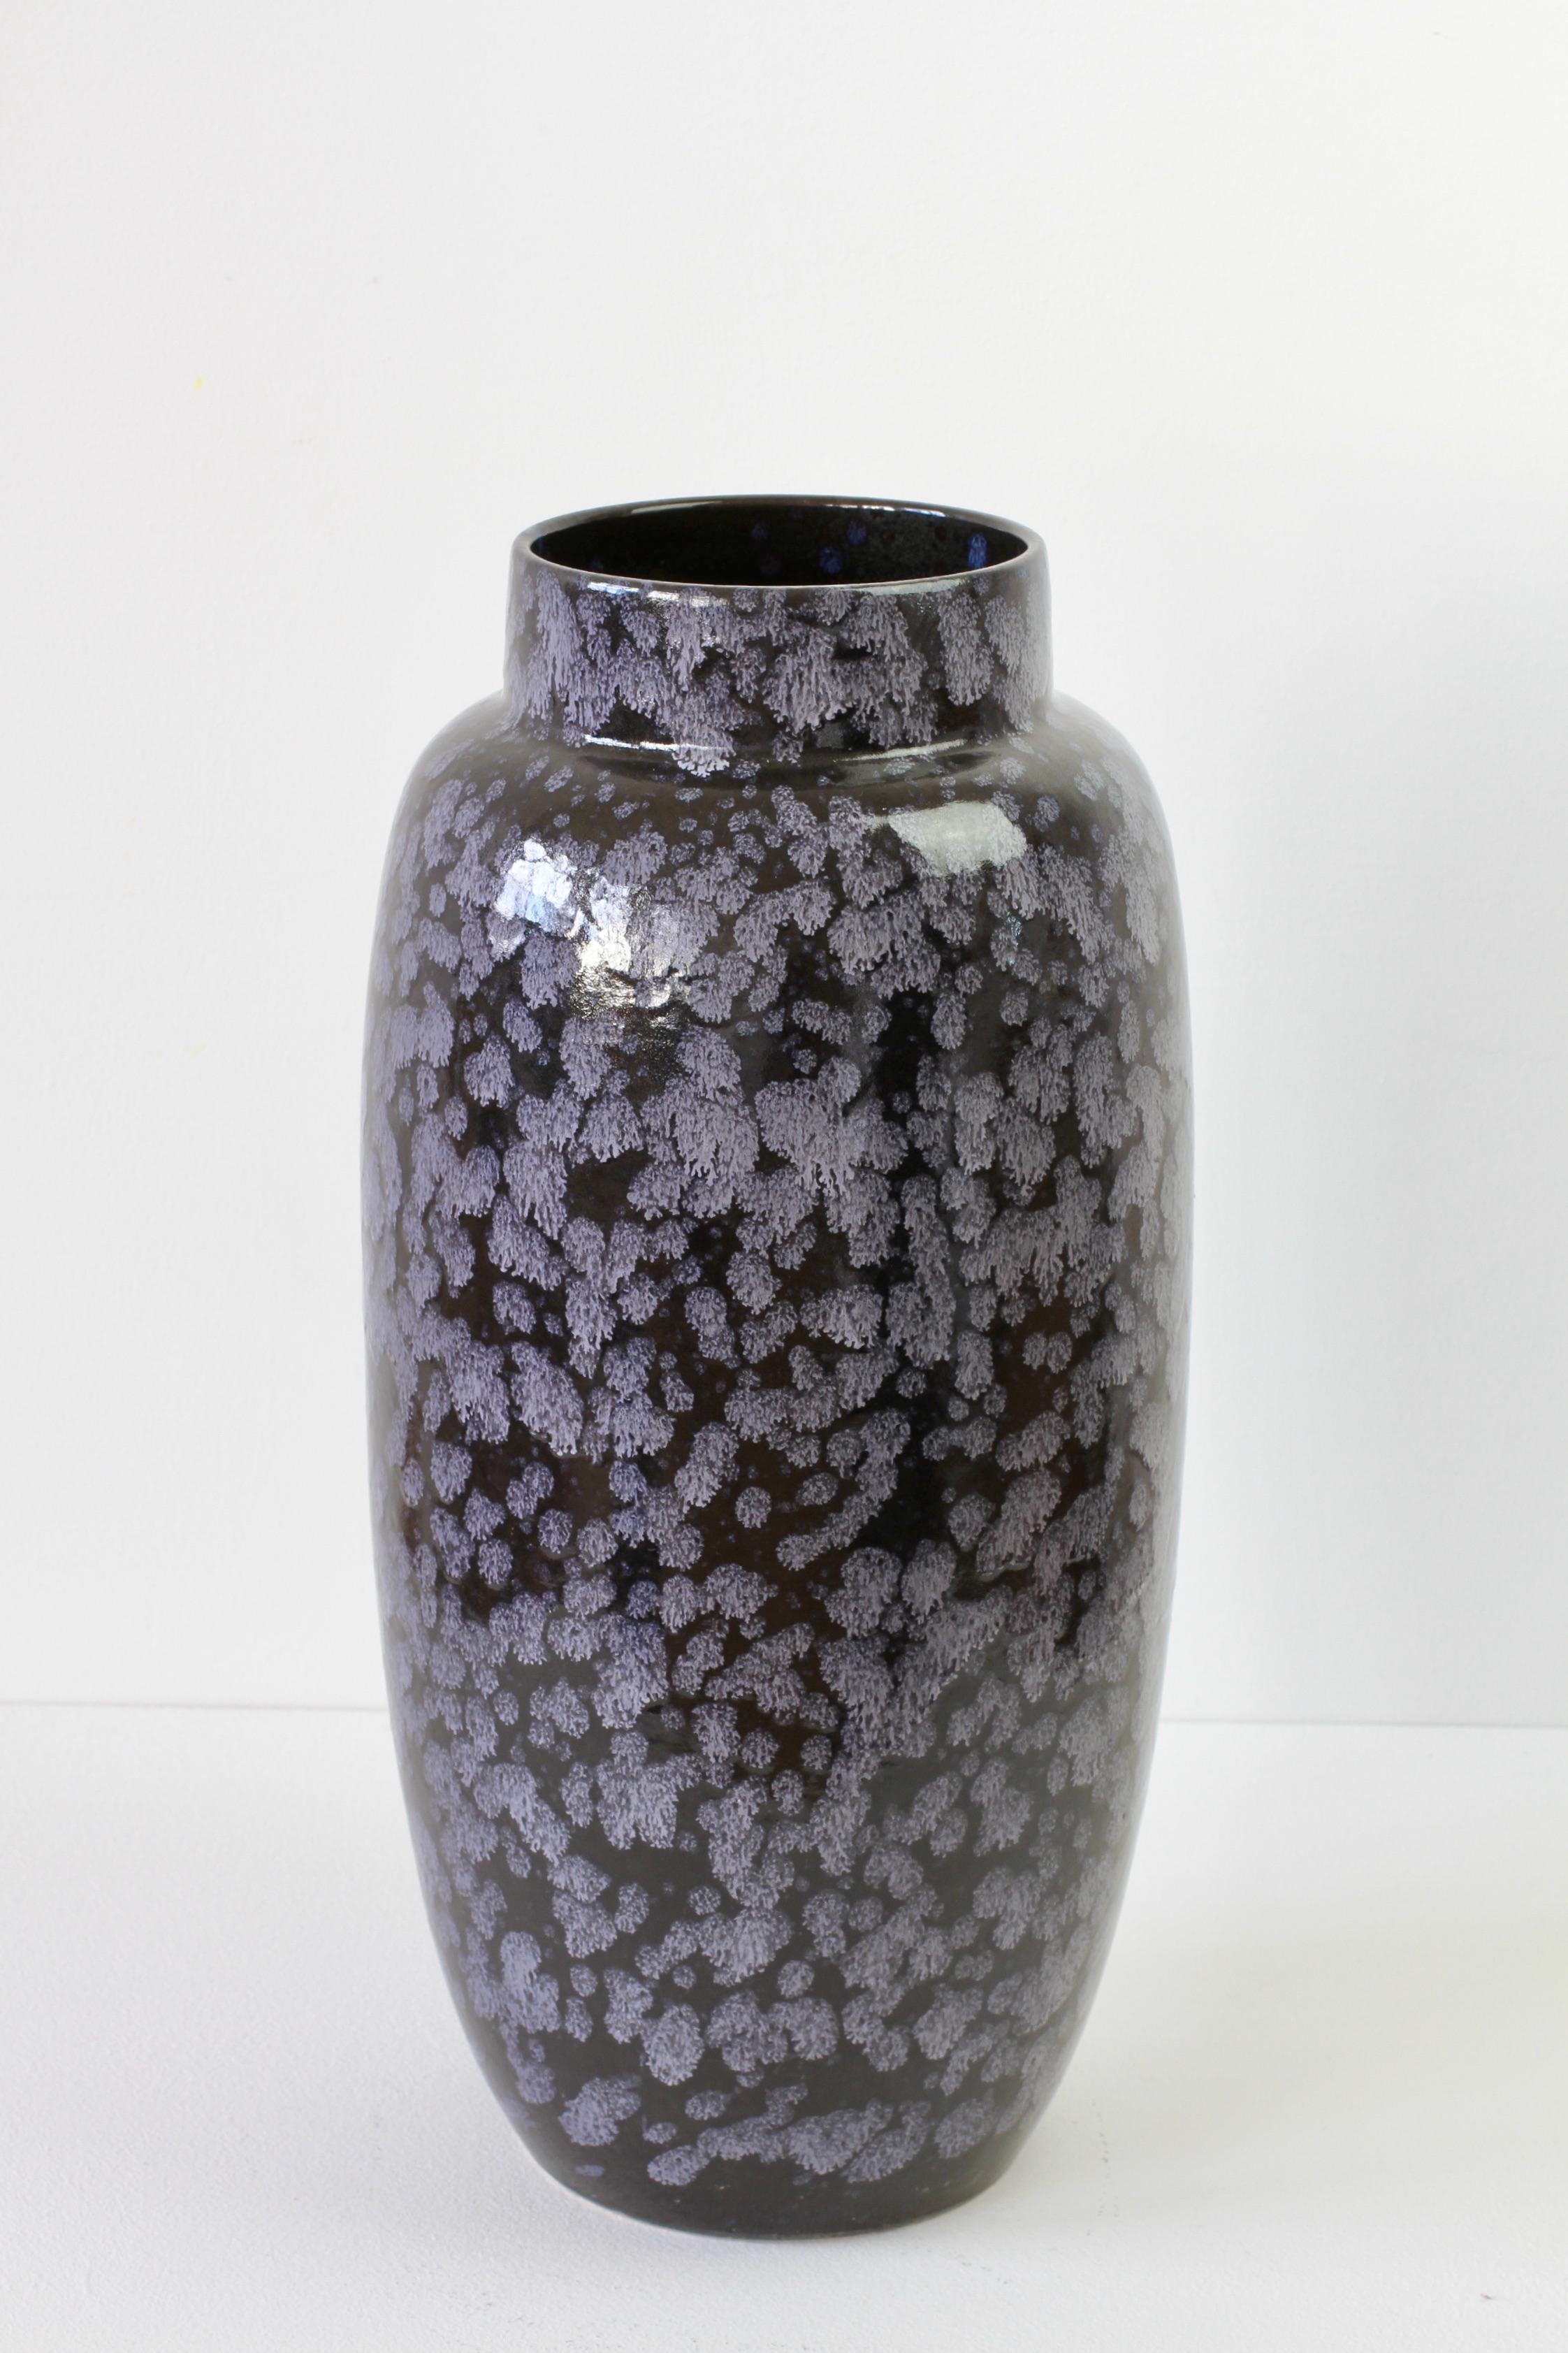 Gorgeous tall floor standing vase or umbrella stand by West German Pottery manufacturer Scheurich Keramik (Ceramic), circa 1970s. Add a splash of color / colour to your home decor with this beautiful black and gray glaze. Would make a great umbrella